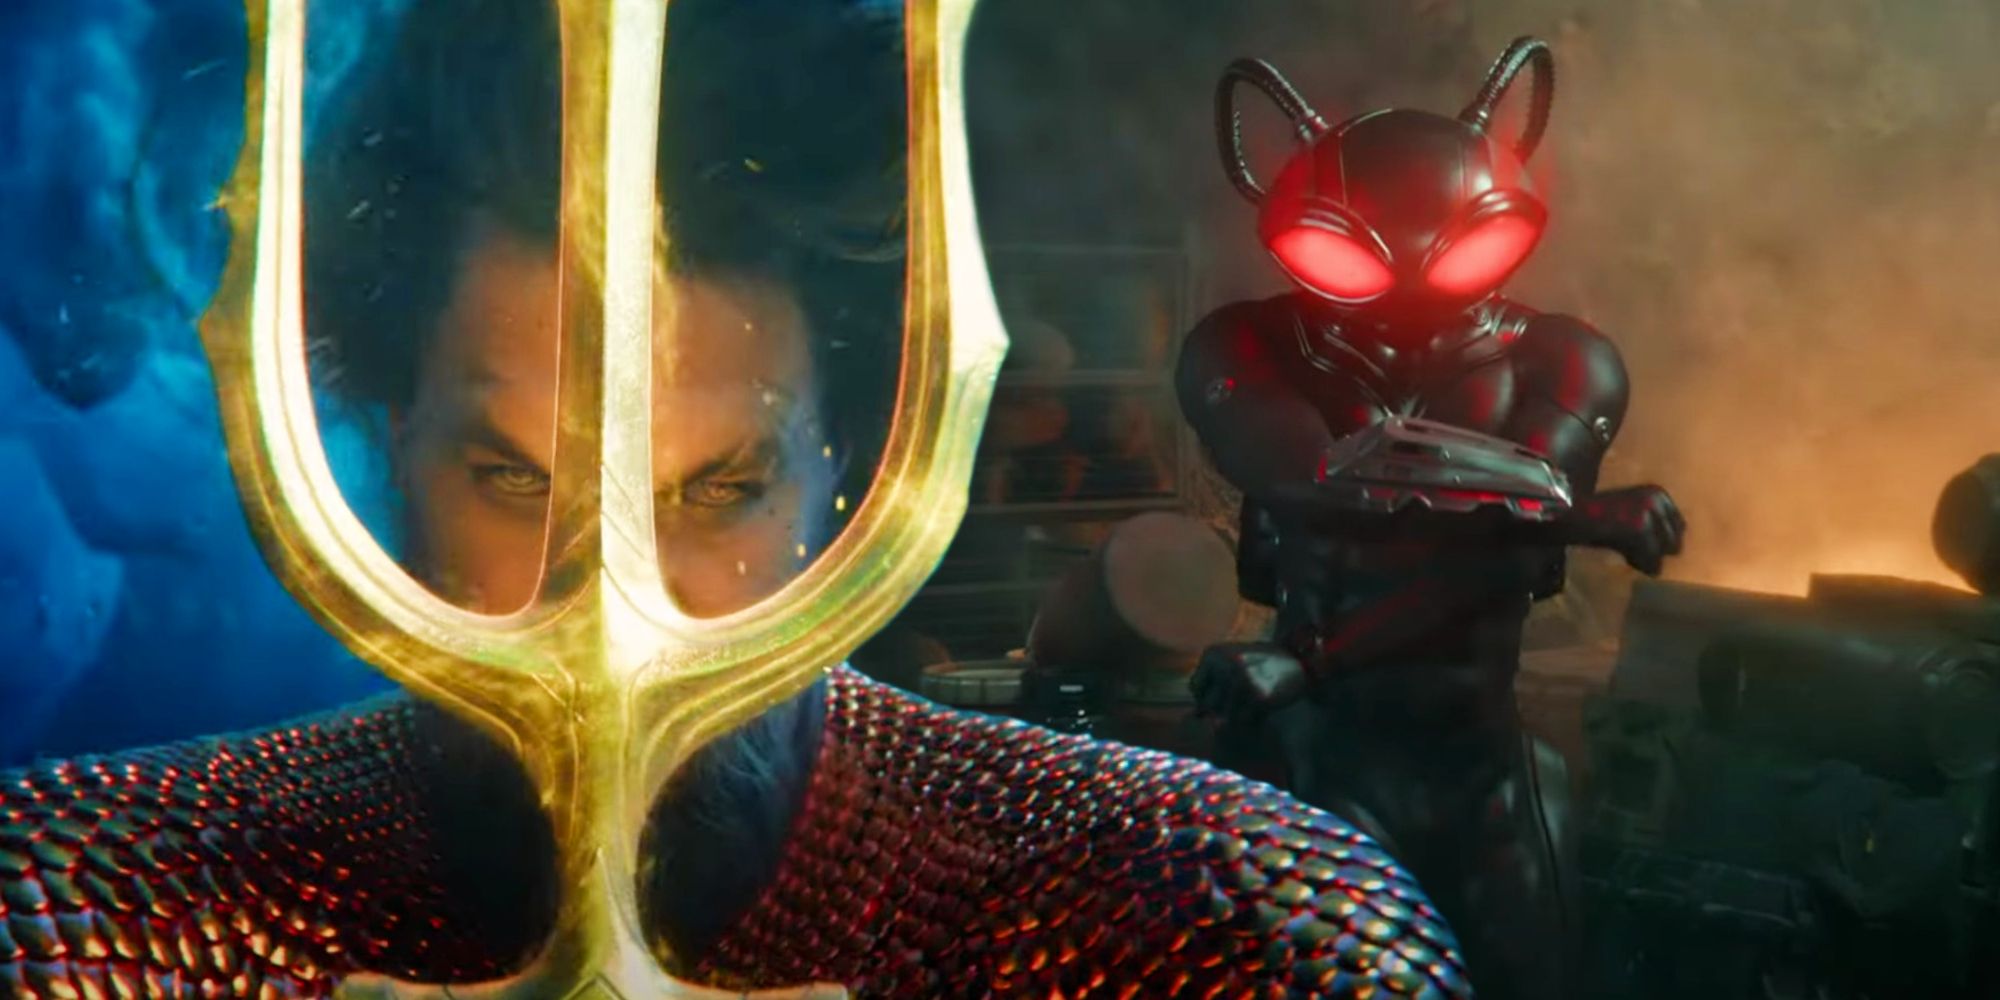 Aquaman And The Lost Kingdom Interview: James Wan On Arthur’s Growth & James Gunn’s DC Universe